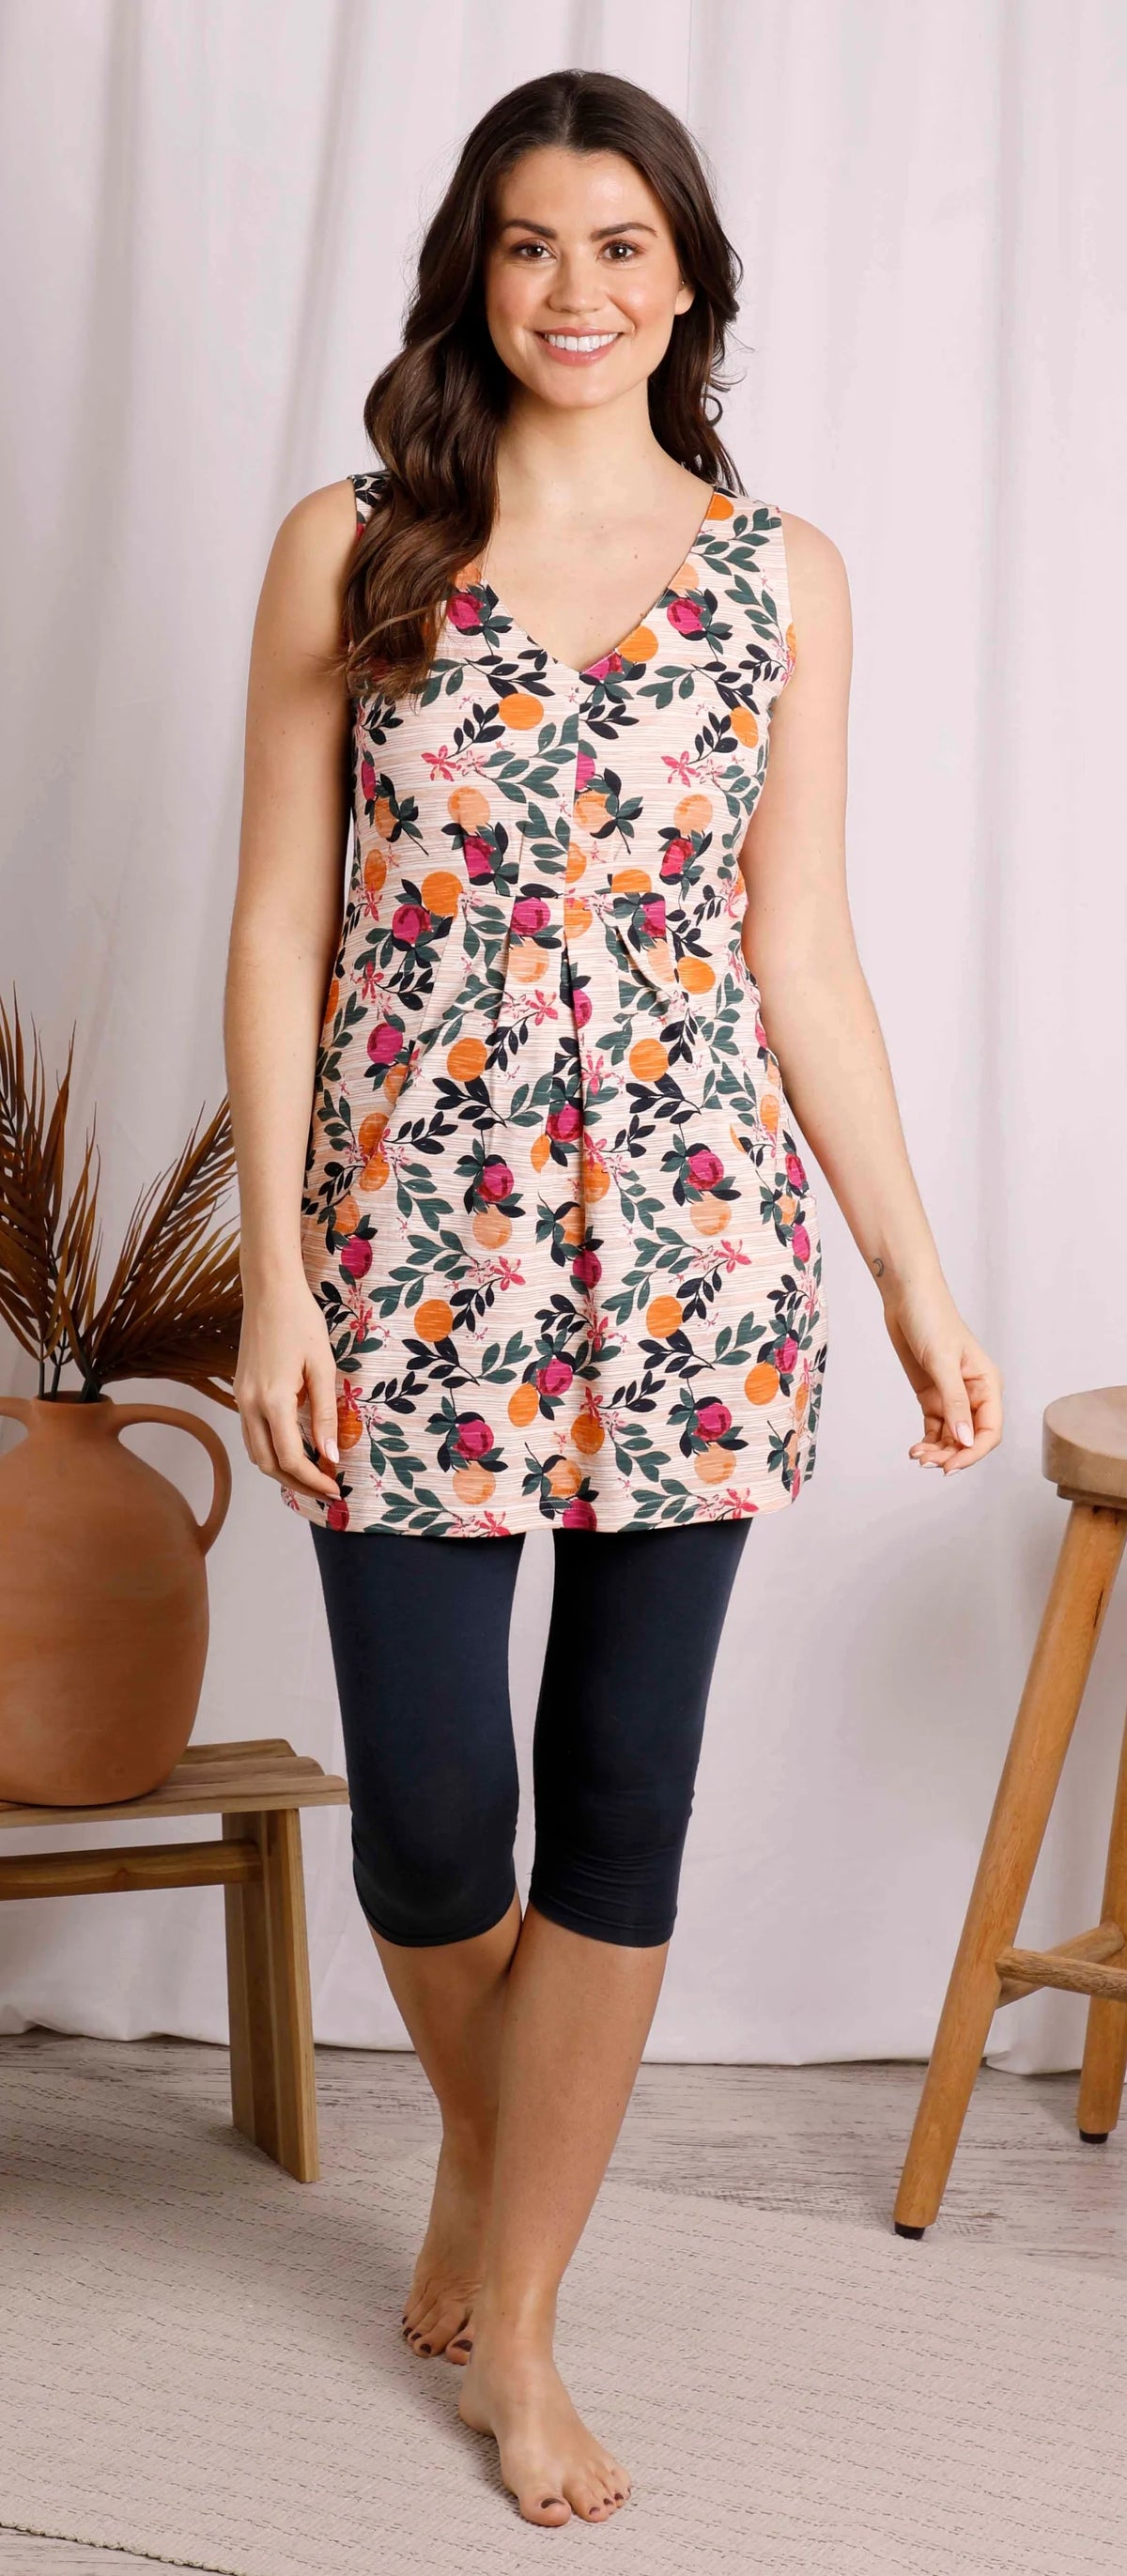 Women's v-neck sleeveless Indus tunic from Weird Fish in a Cantaloupe fruit print.